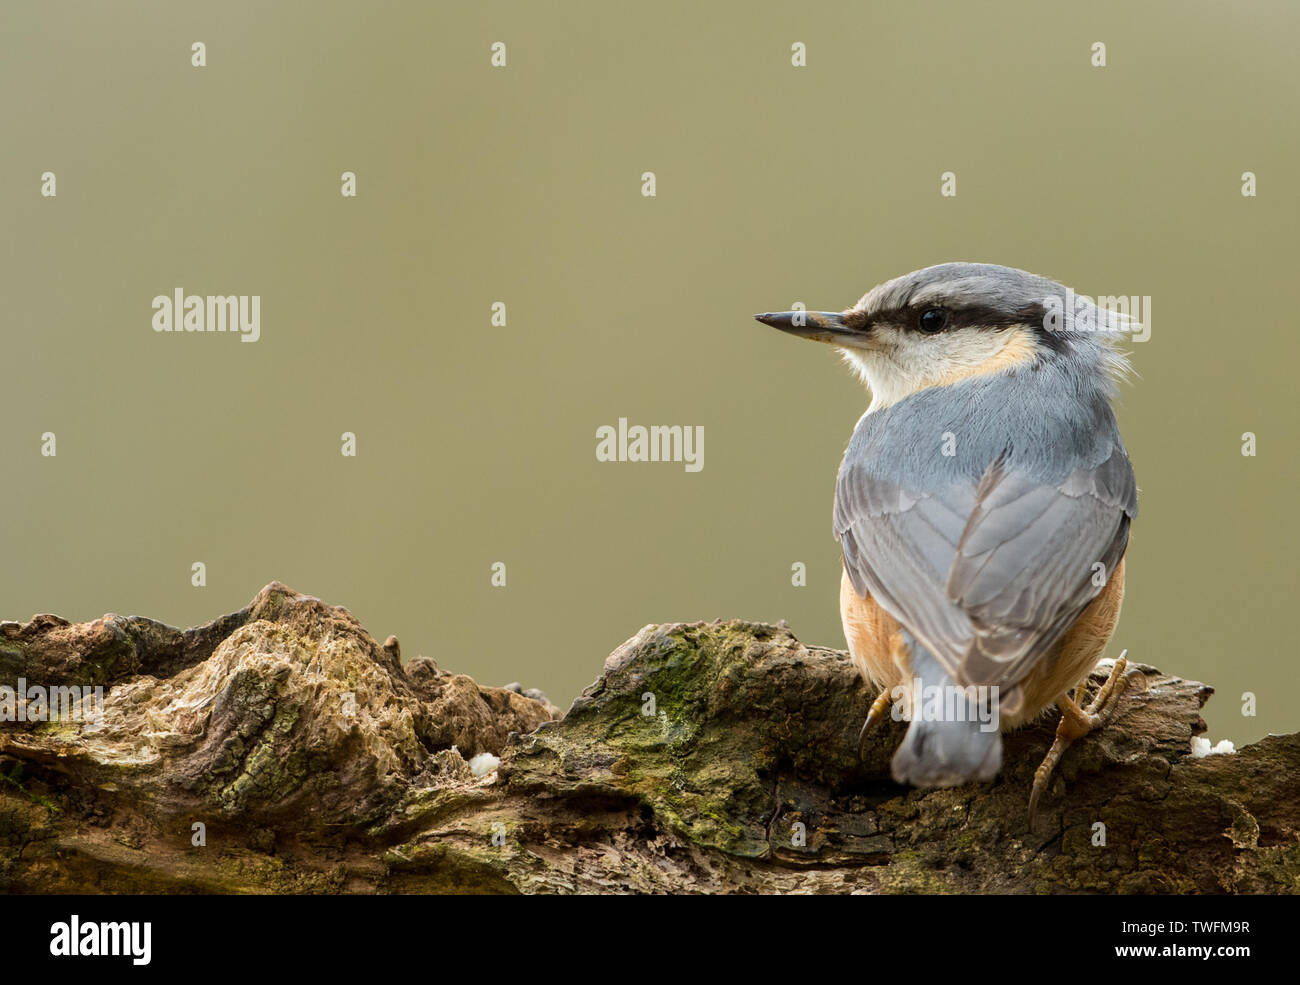 A European Nuthatch (Sitta europaea) on a log with a clean background, taken in Miserden, Gloucestershire Stock Photo